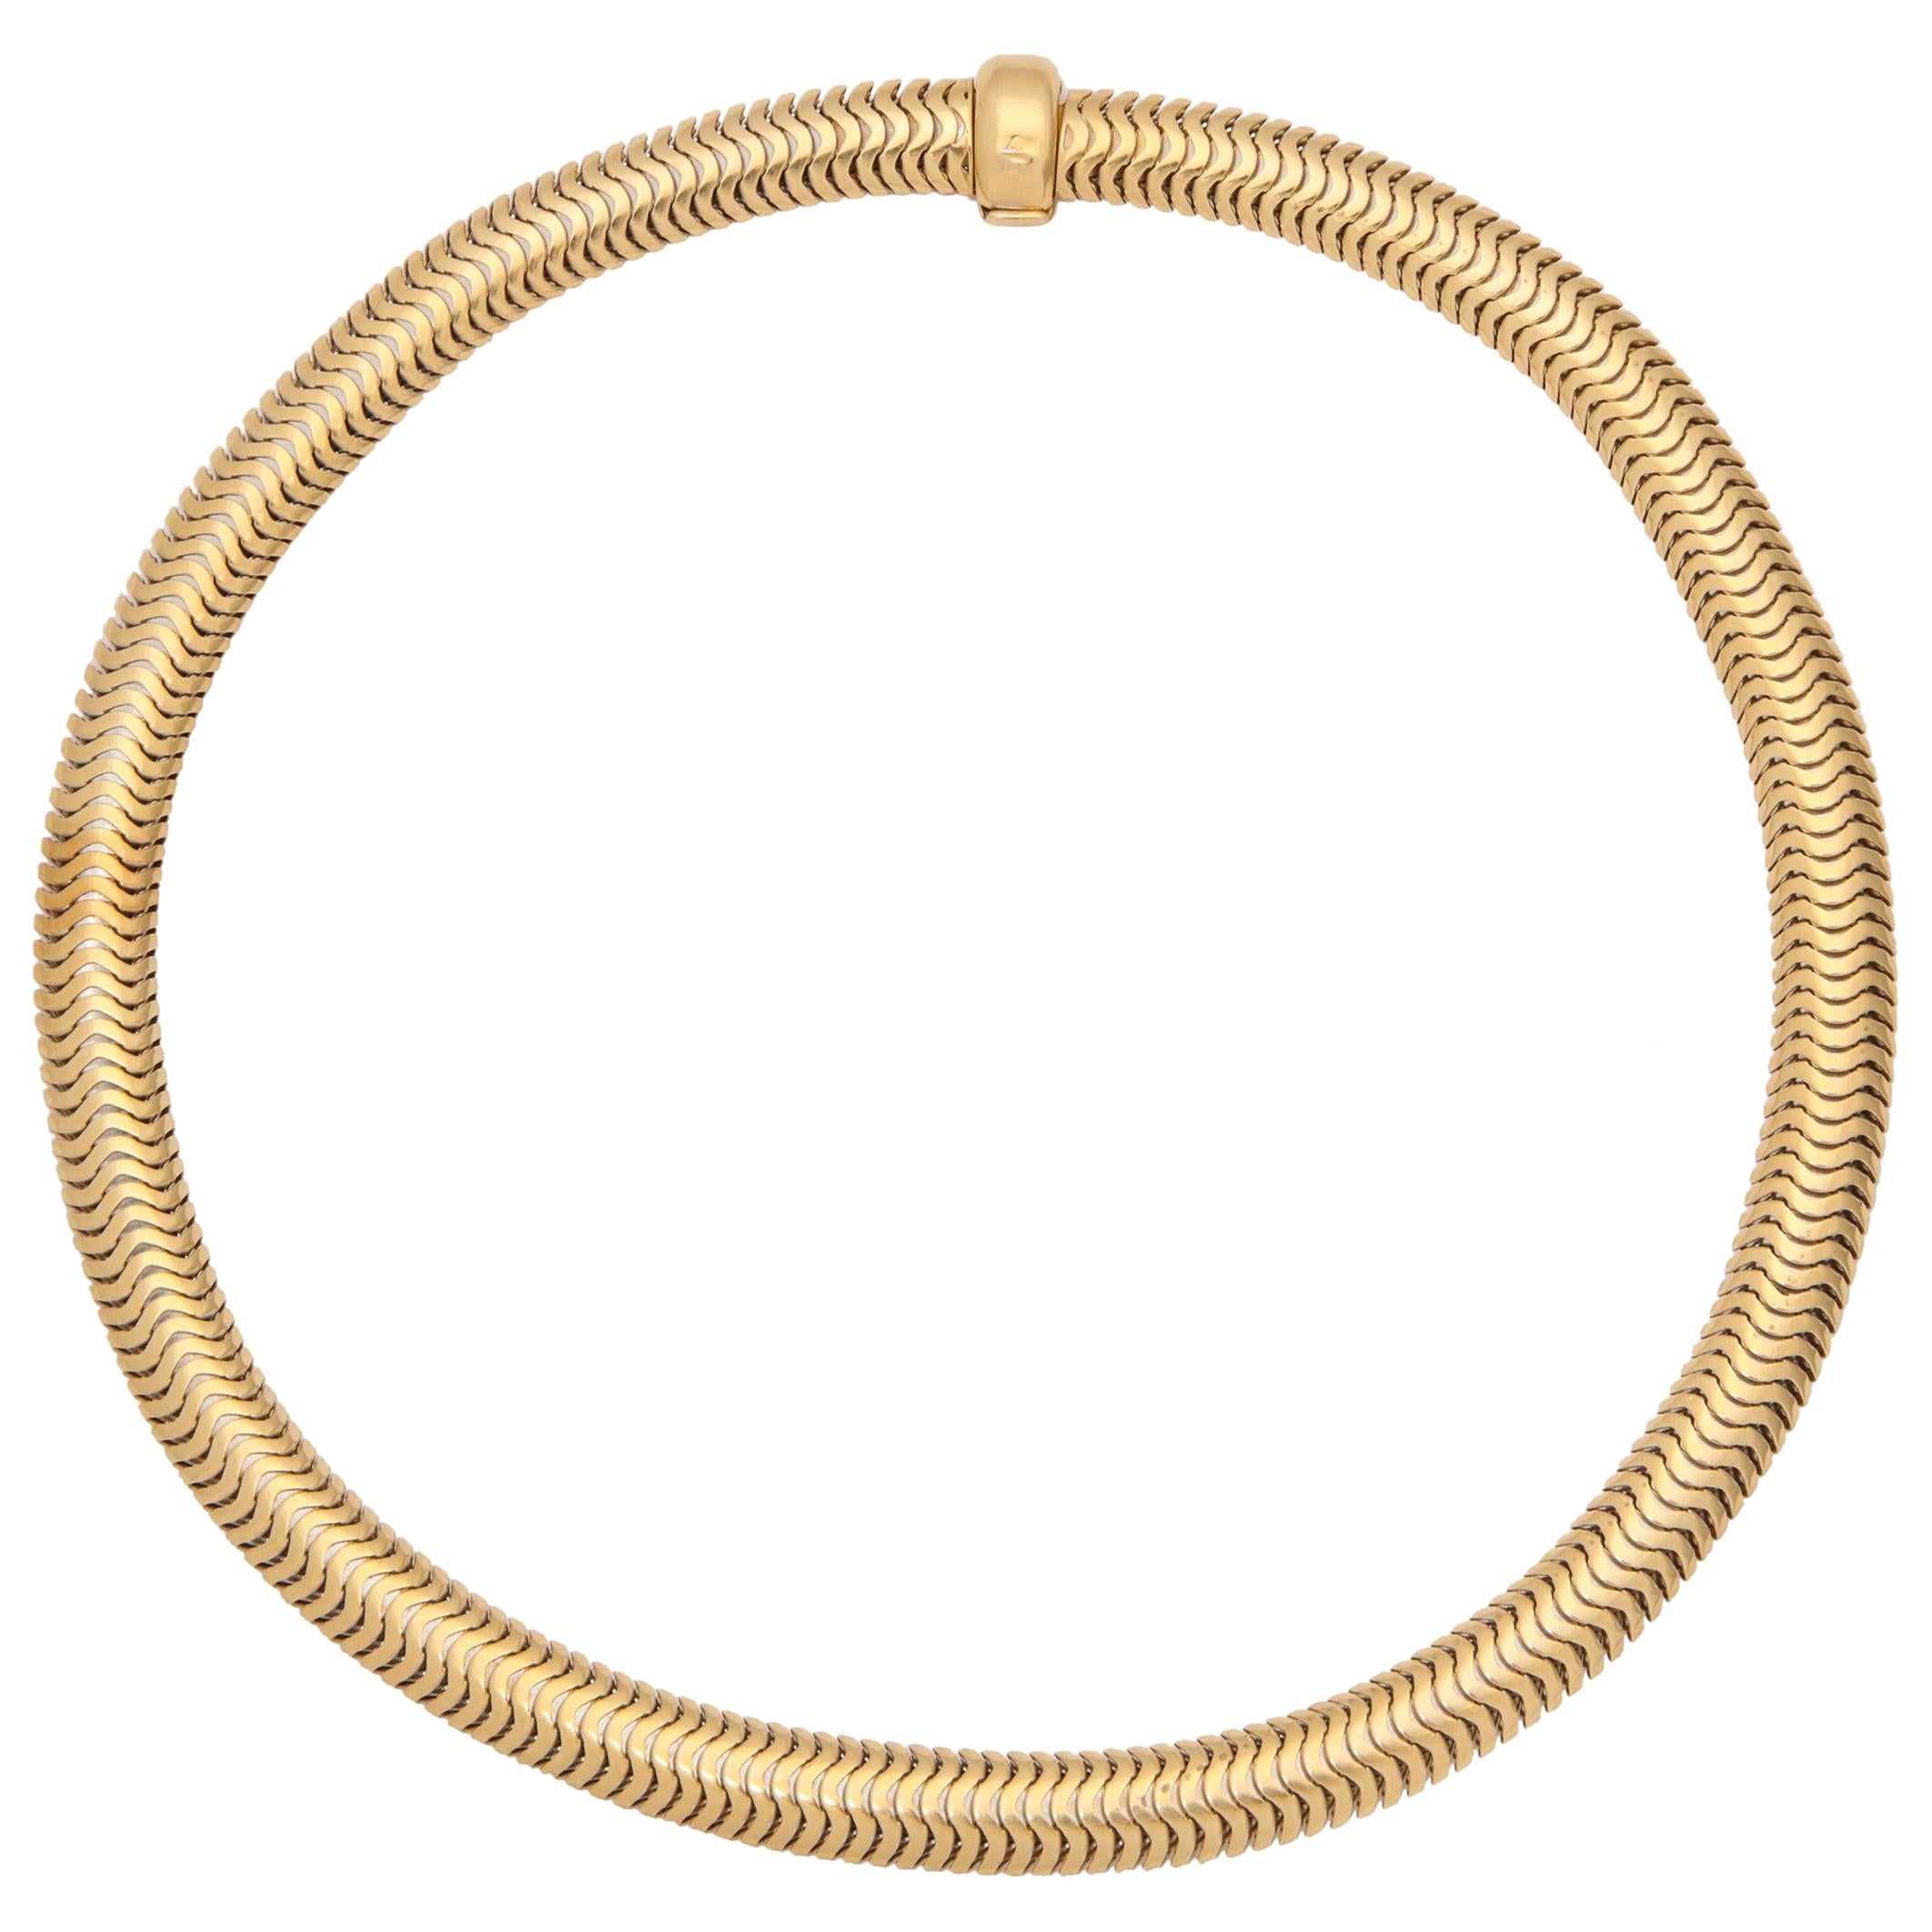 1940s Heavy Flexible Snake Omega Style Gold Slinky Necklace with Gold Clasp